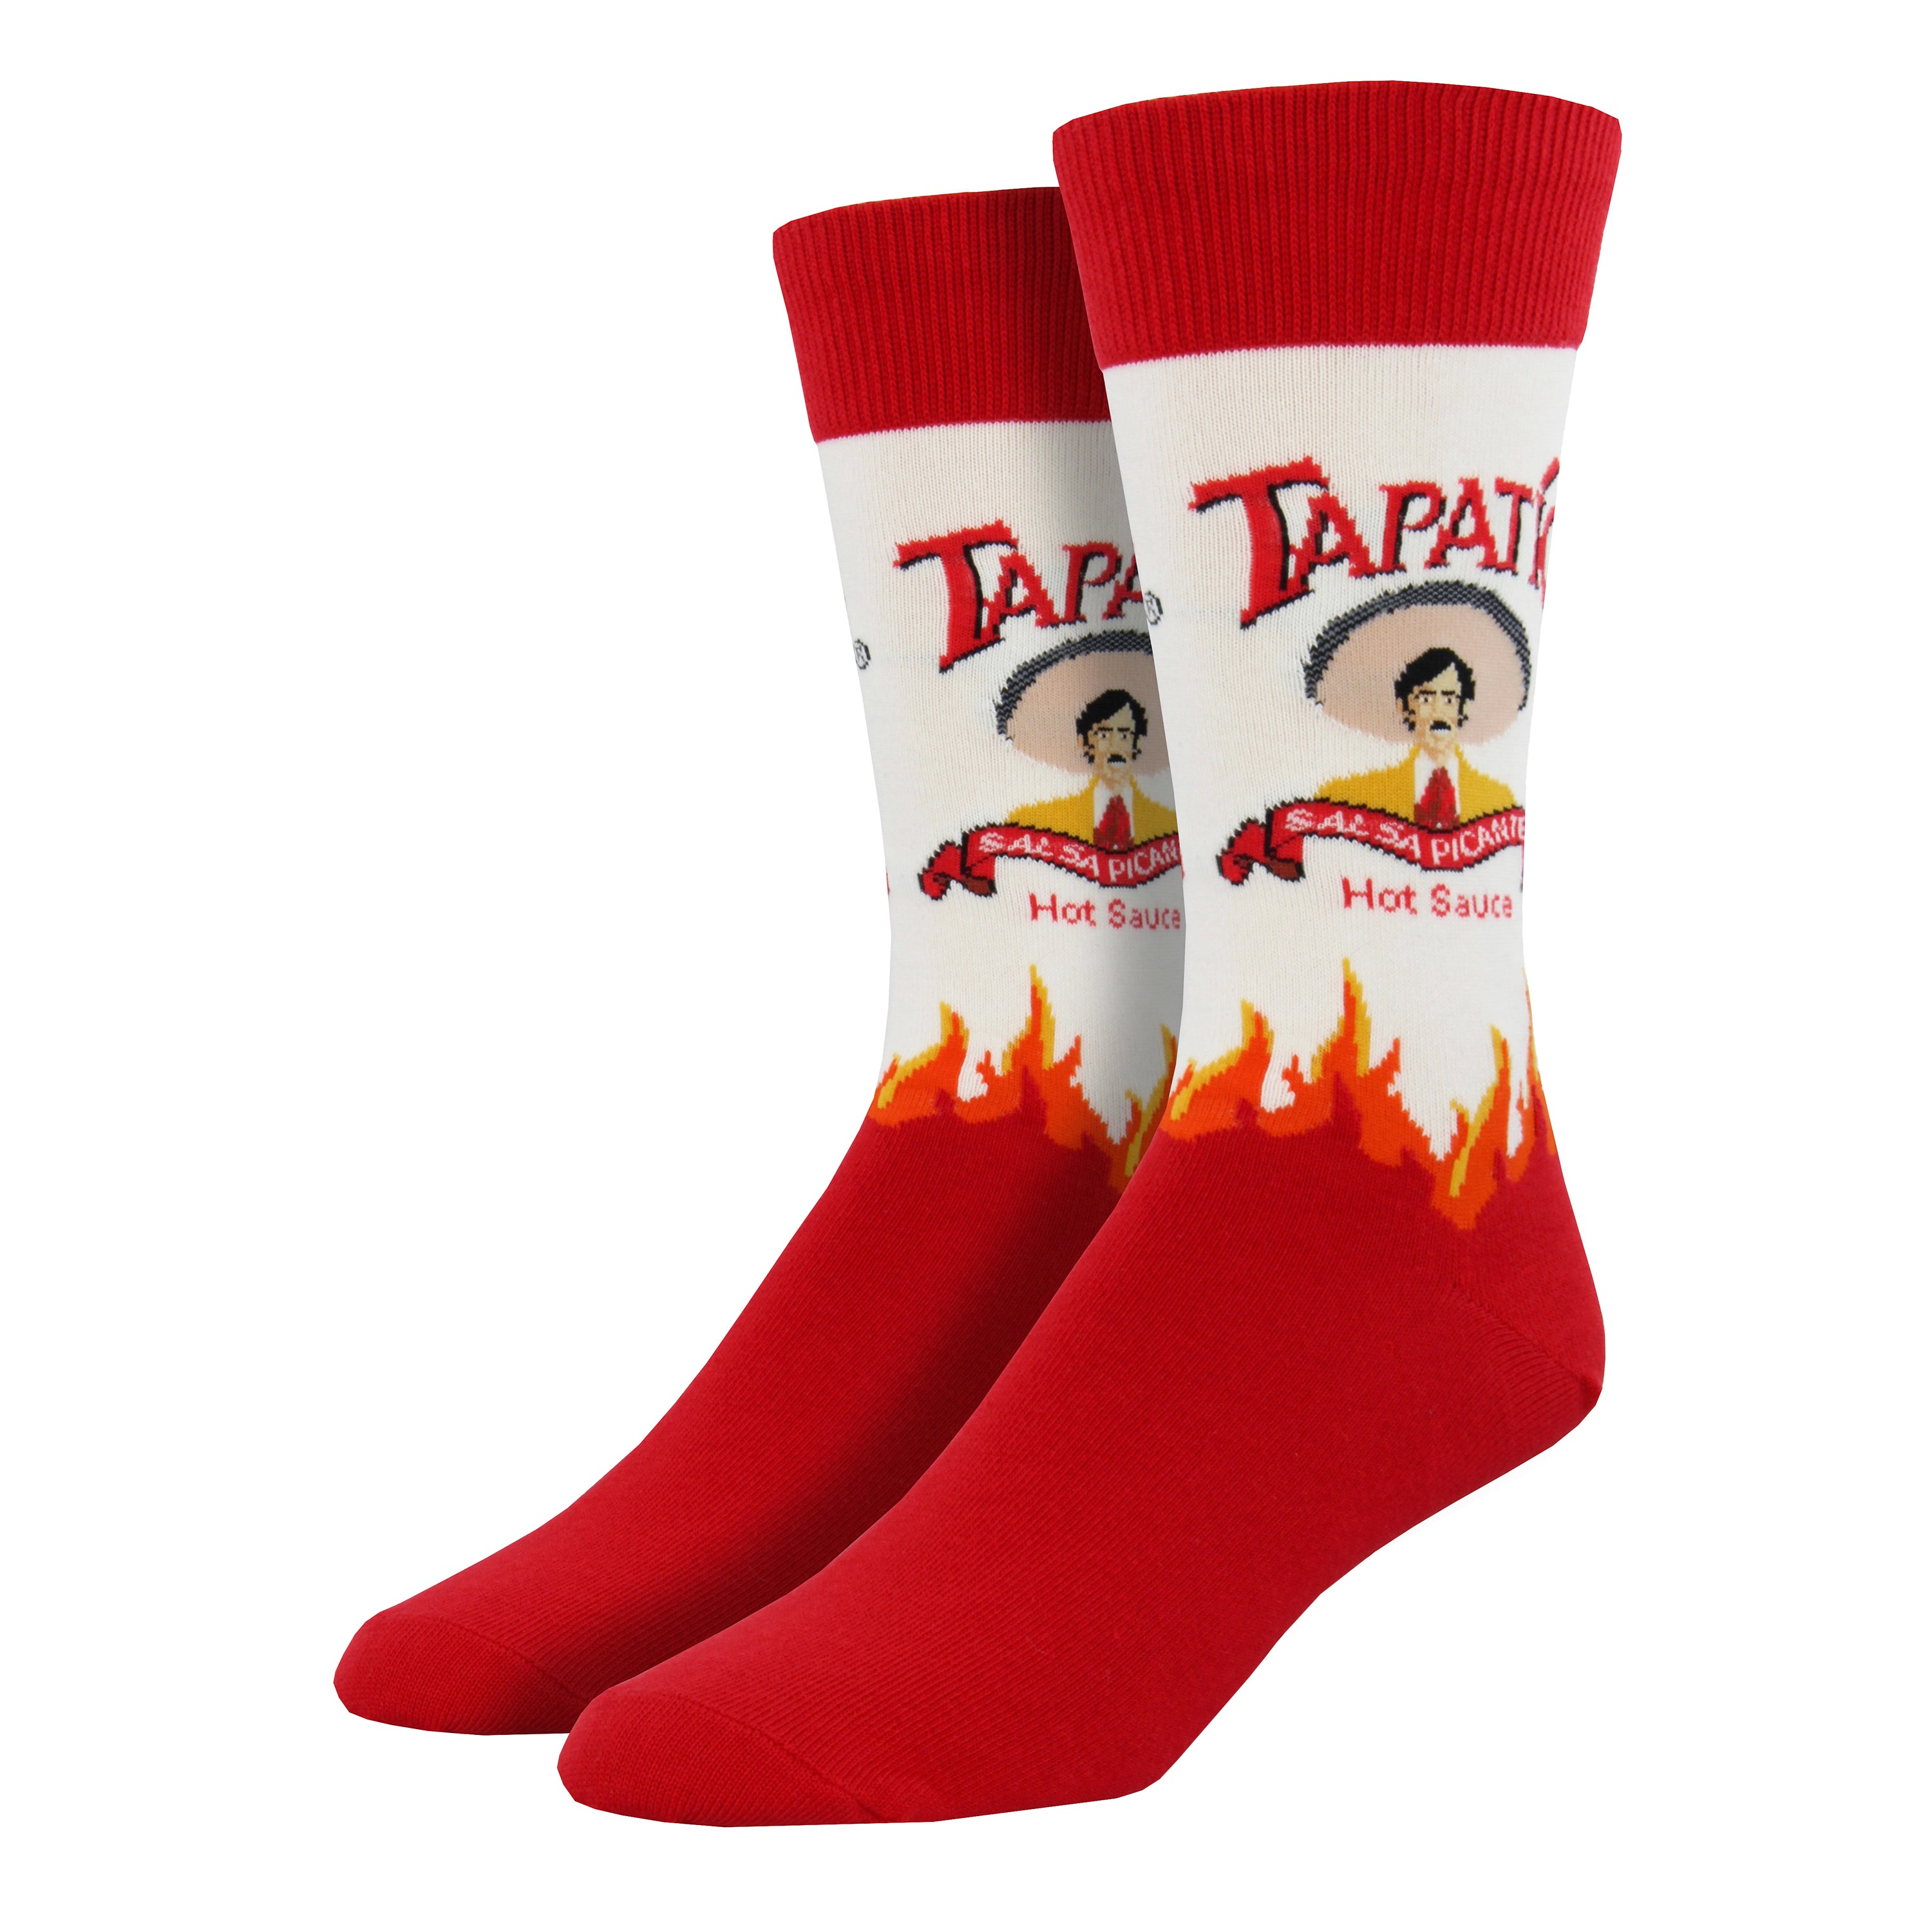 The Tapatio hot sauce logo is shown on a white background with flame accents on this men's crew length Socksmith sock. 